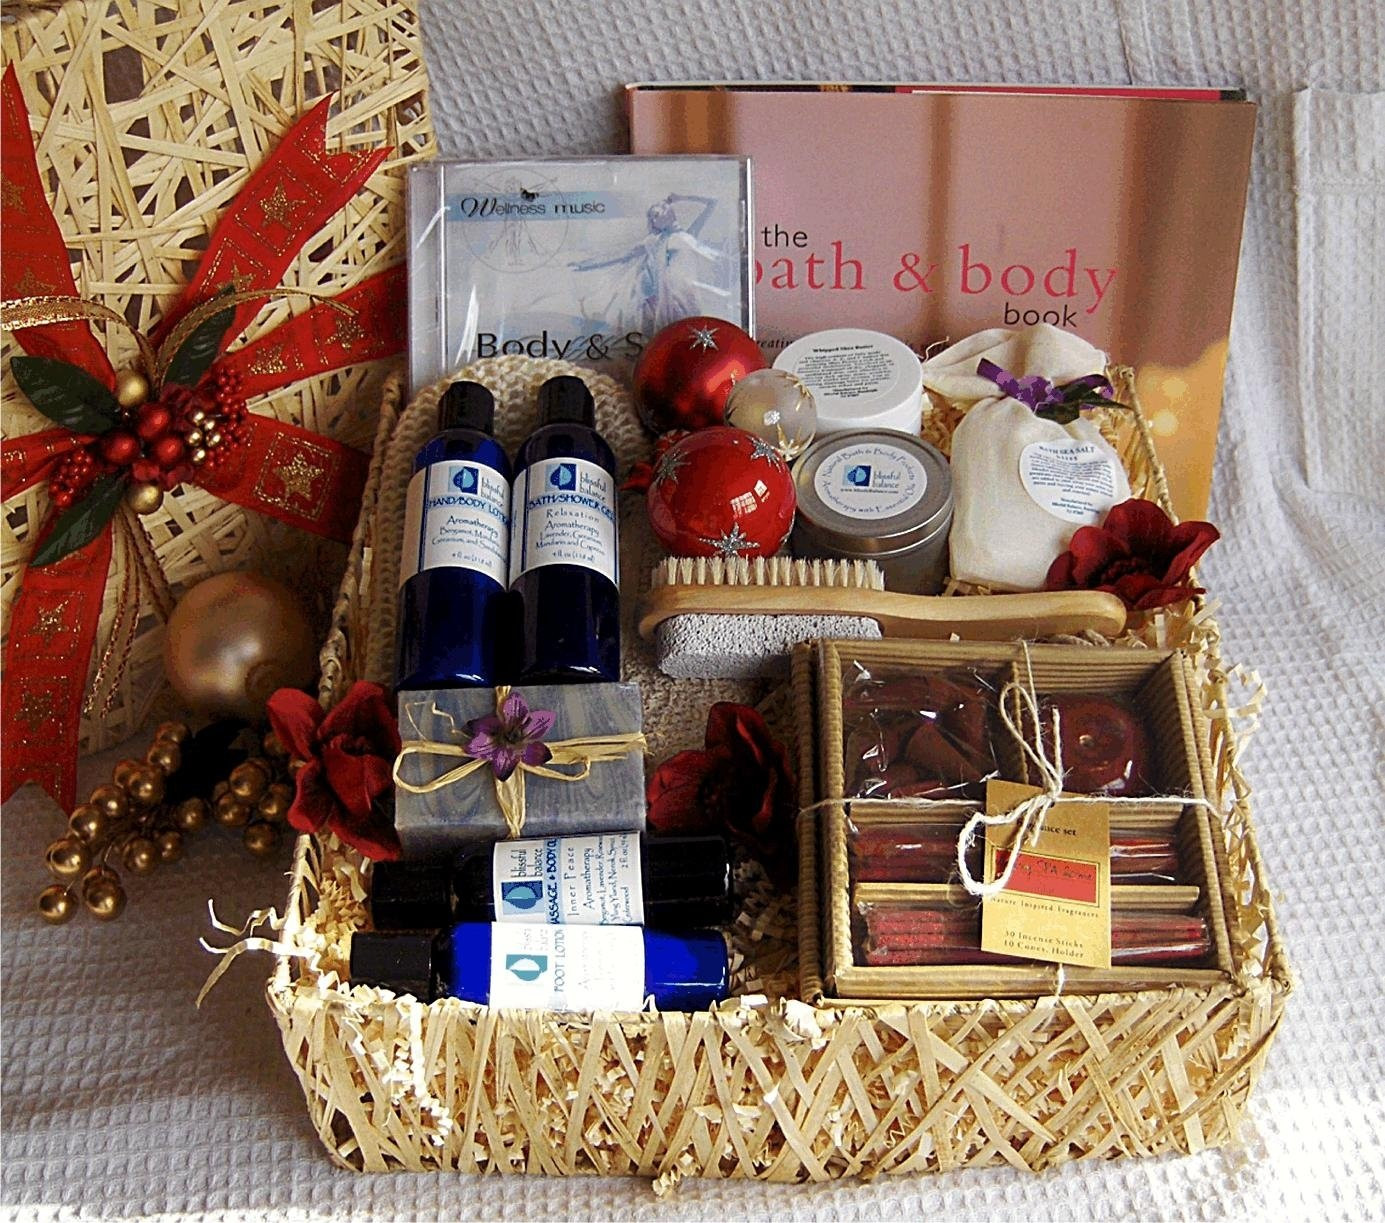 Creative Gift Ideas For Couples
 10 Stylish Christmas Gift Basket Ideas For Couples 2020